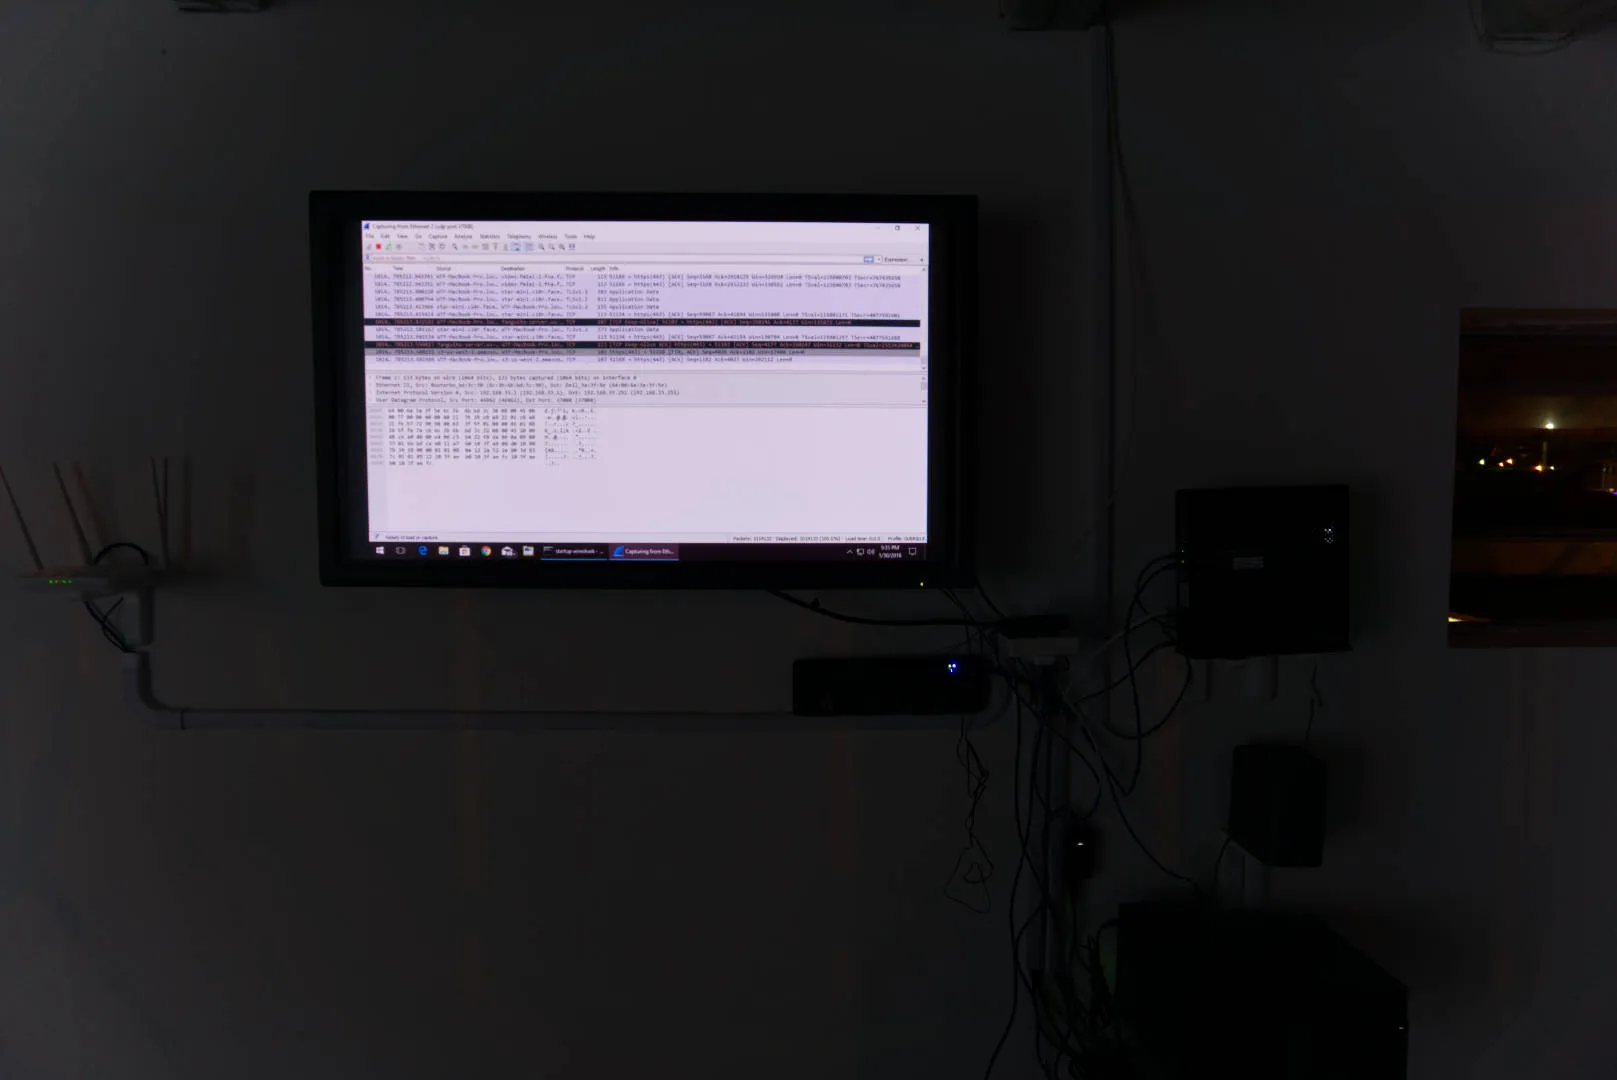 A dark room with a screen that shows Naked Link's Data Viz